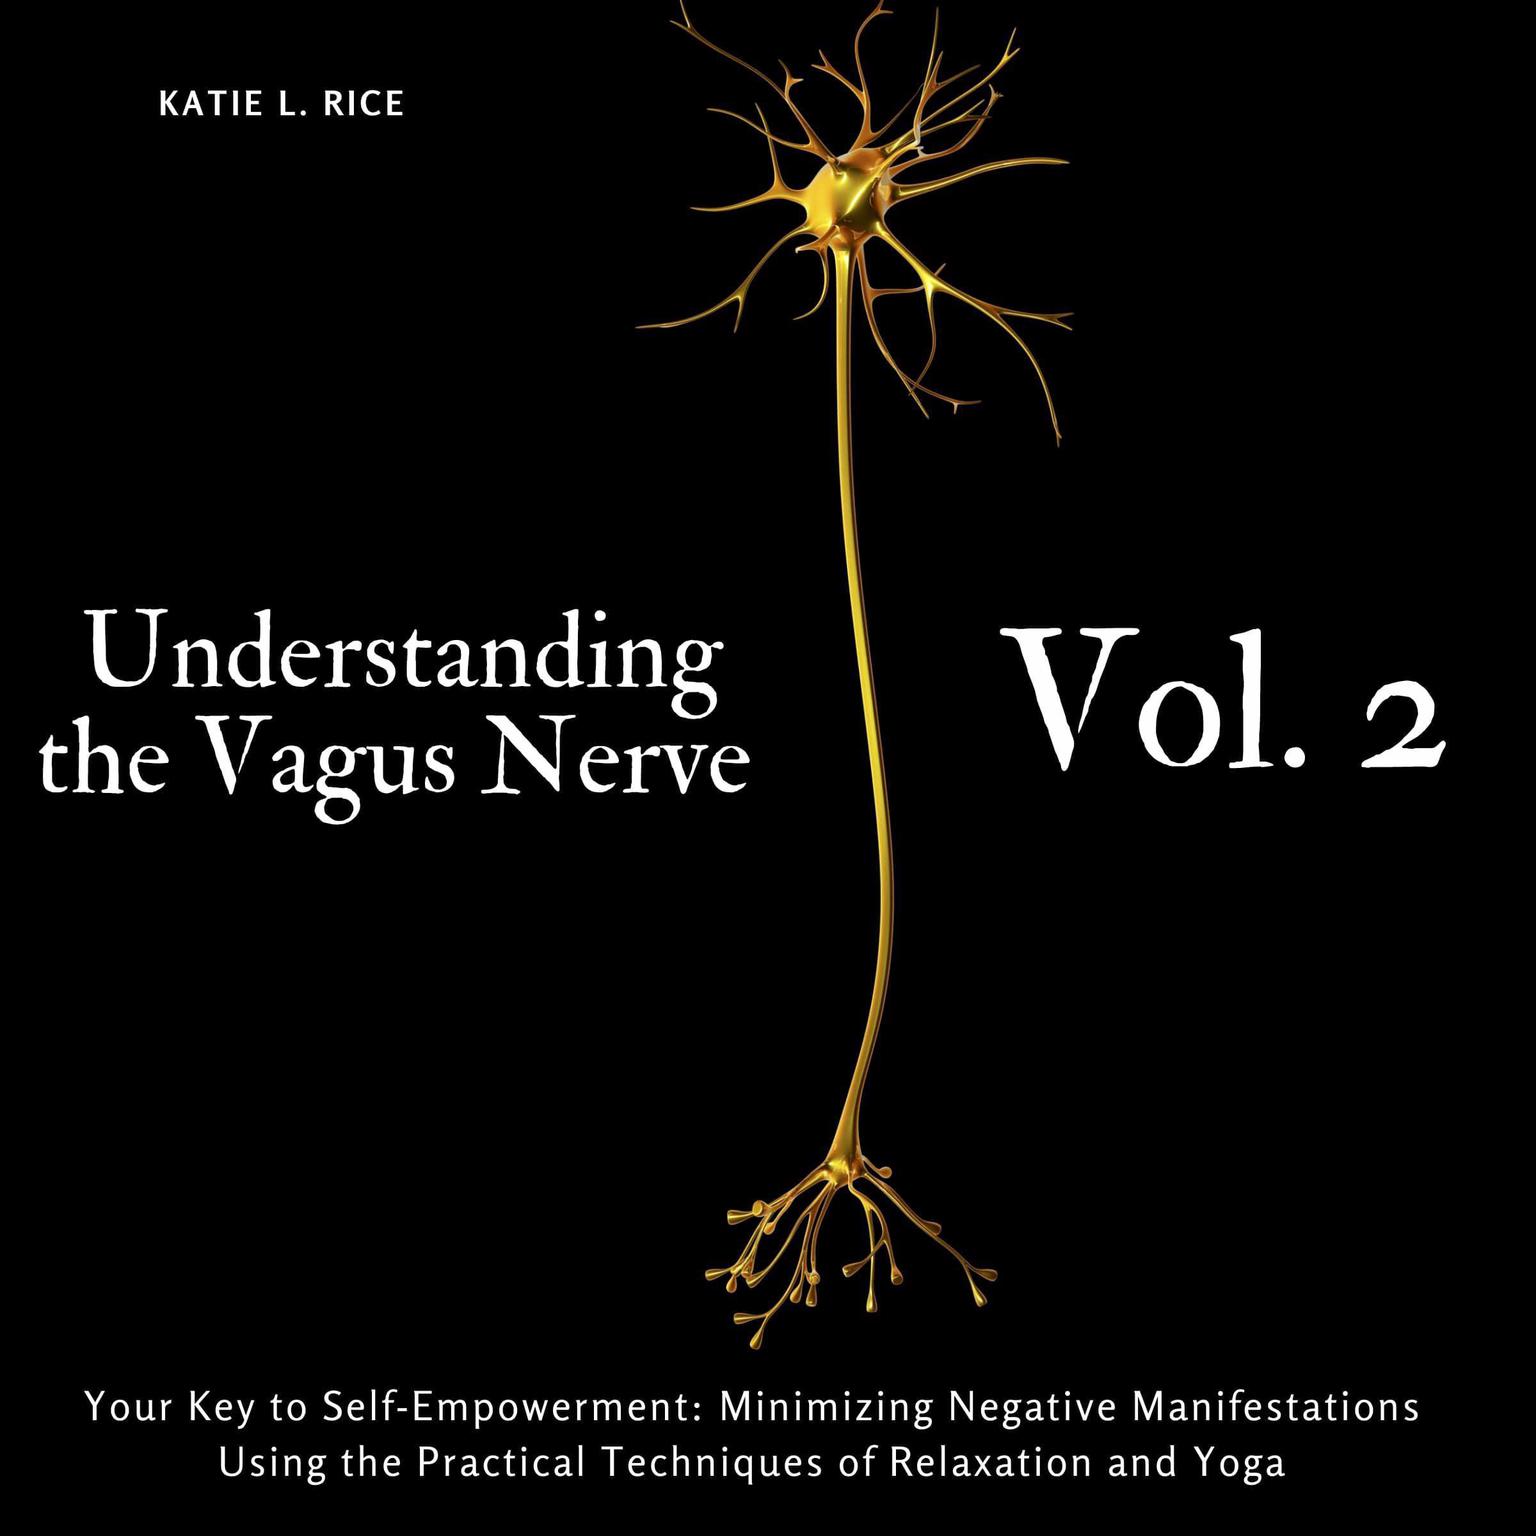 Understanding the Vagus Nerve - Vol. 2: Your Key to Self-Empowerment: Minimizing Negative Manifestations Using the Practical Techniques of Relaxation and Yoga Audiobook, by Katie L Rice